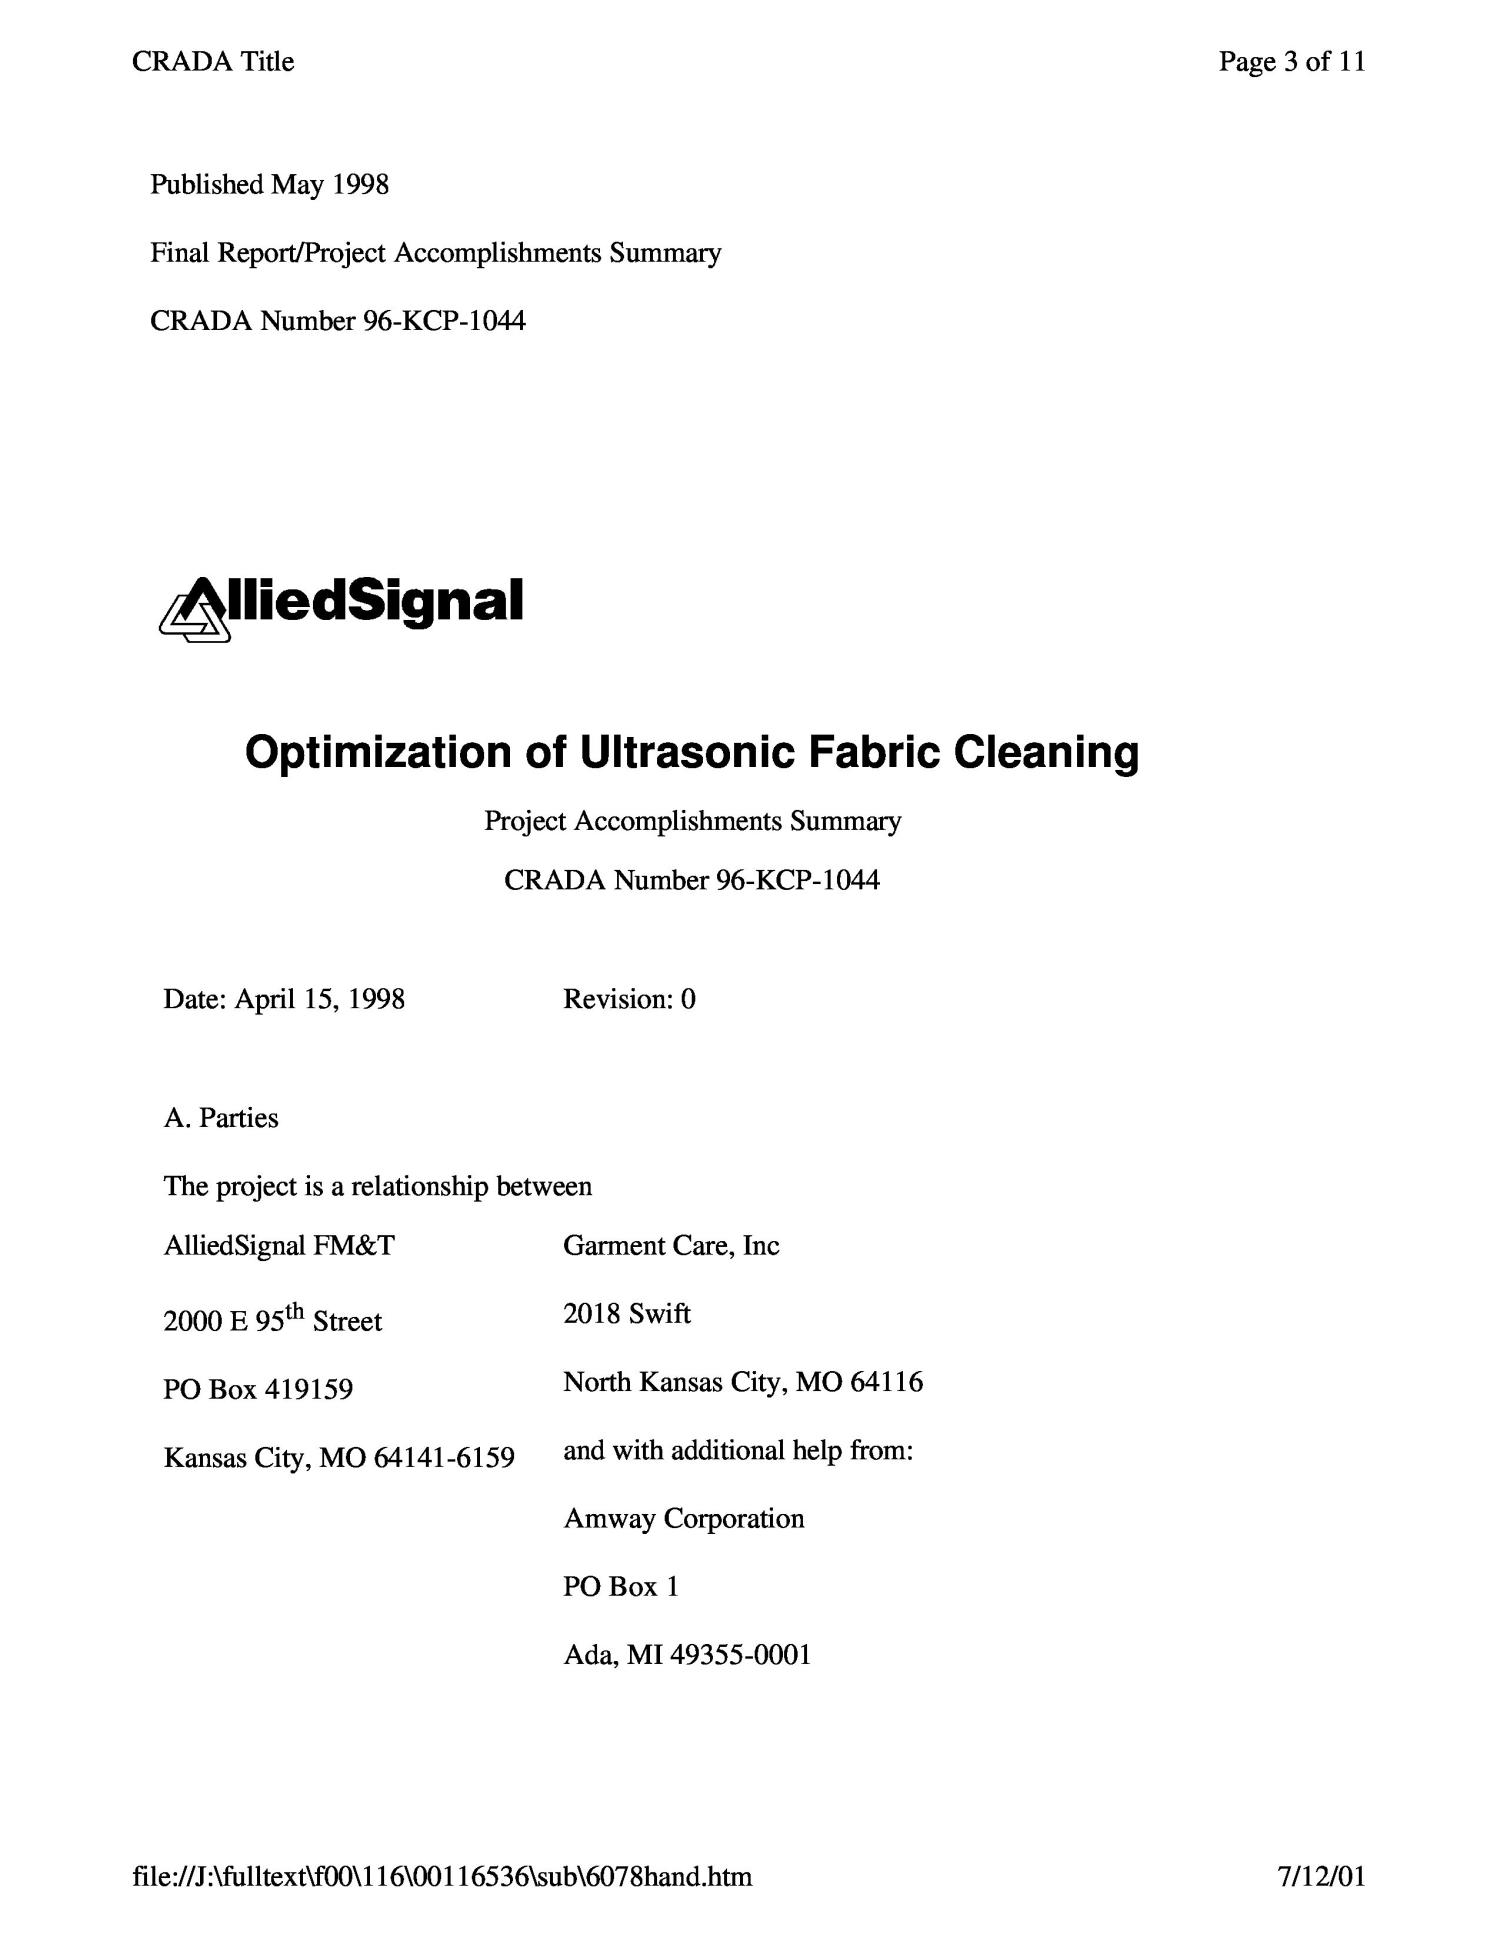 Optimization of Ultrasonic Fabric Cleaning
                                                
                                                    [Sequence #]: 3 of 11
                                                